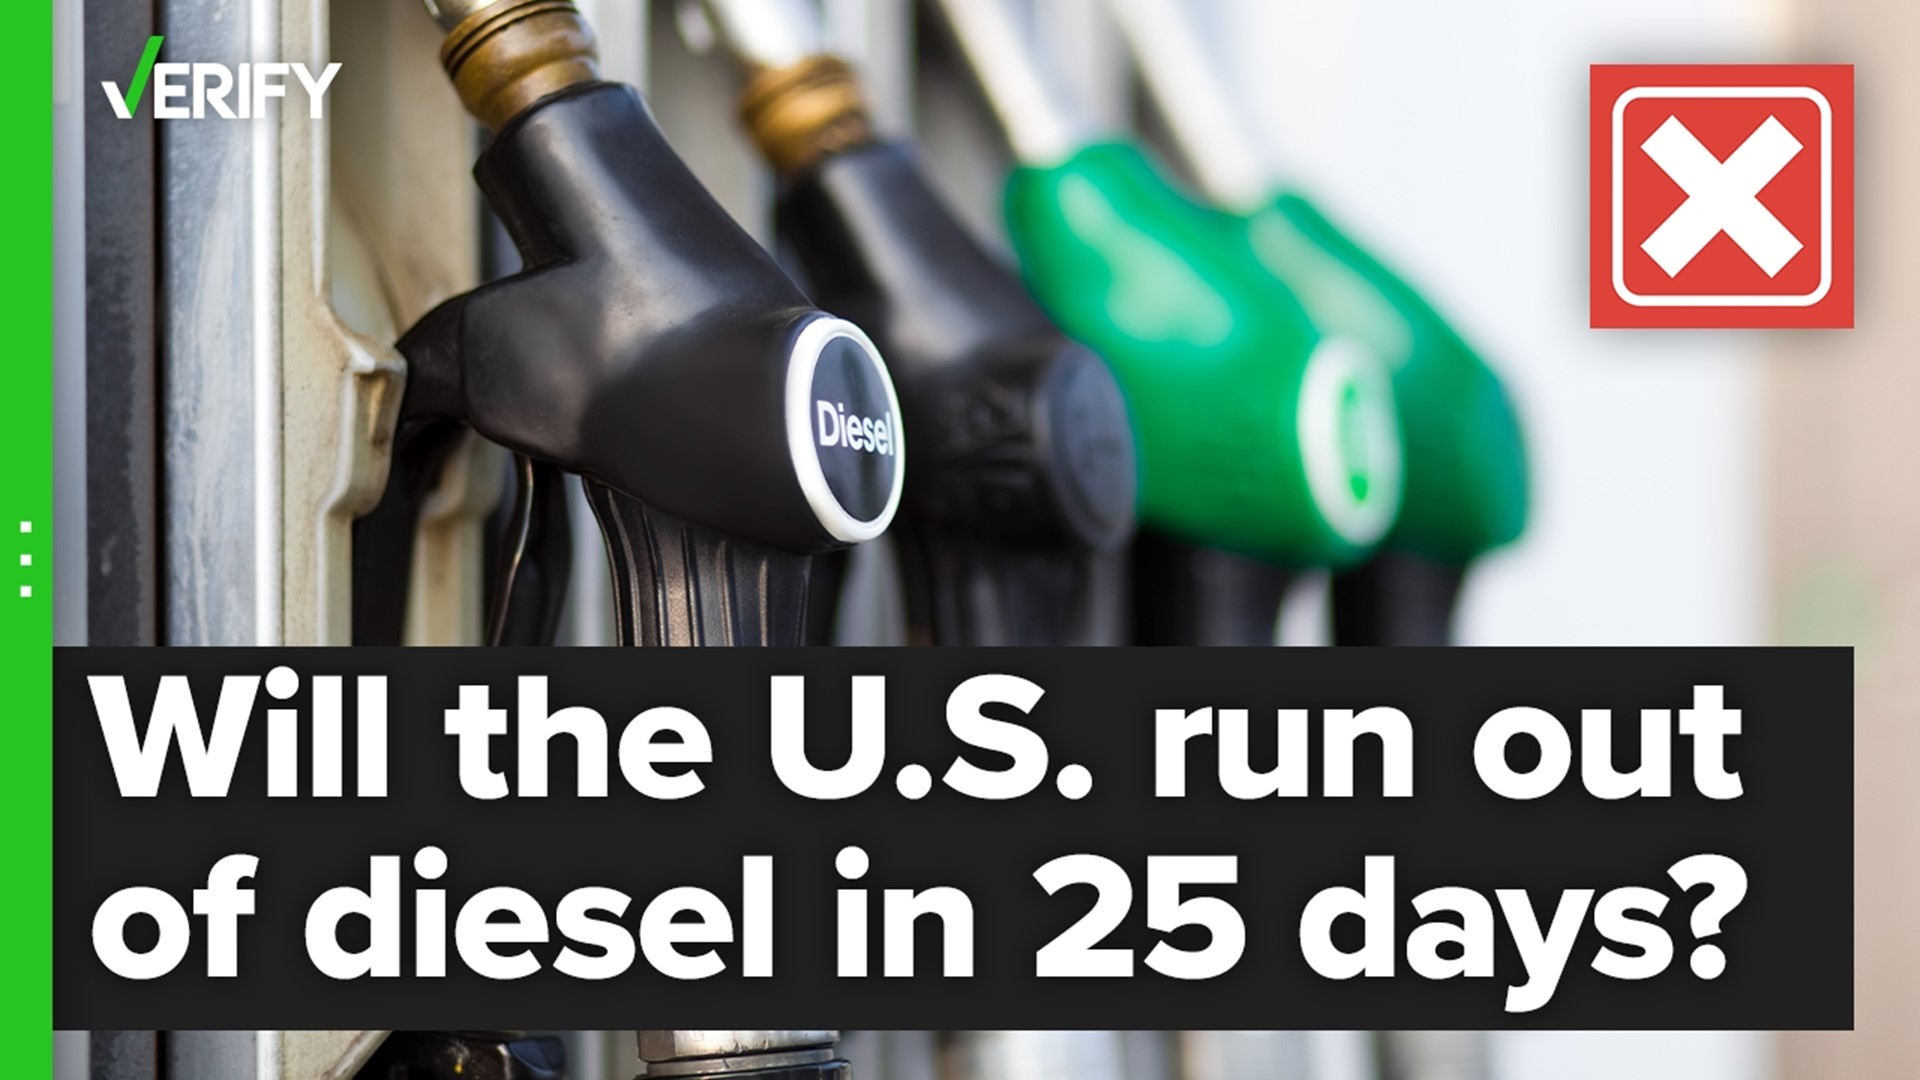 Tucker Carlson falsely claimed that the U.S. would run out of diesel fuel by Thanksgiving week. Here’s what the 25 days’ worth of supply metric actually means.